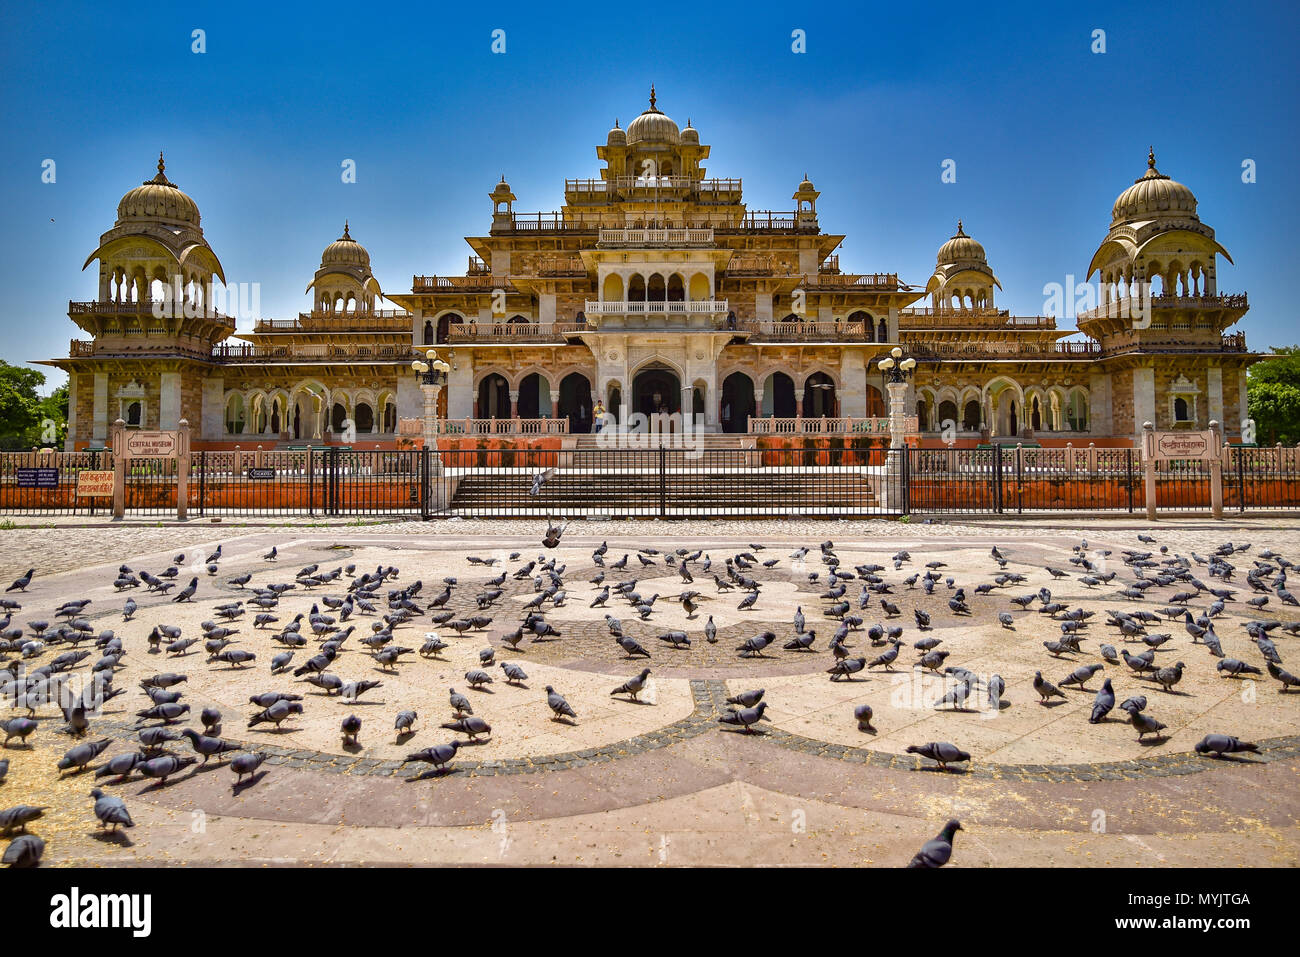 Albert Hall Museum and square with pigeons, Jaipur Stock Photo